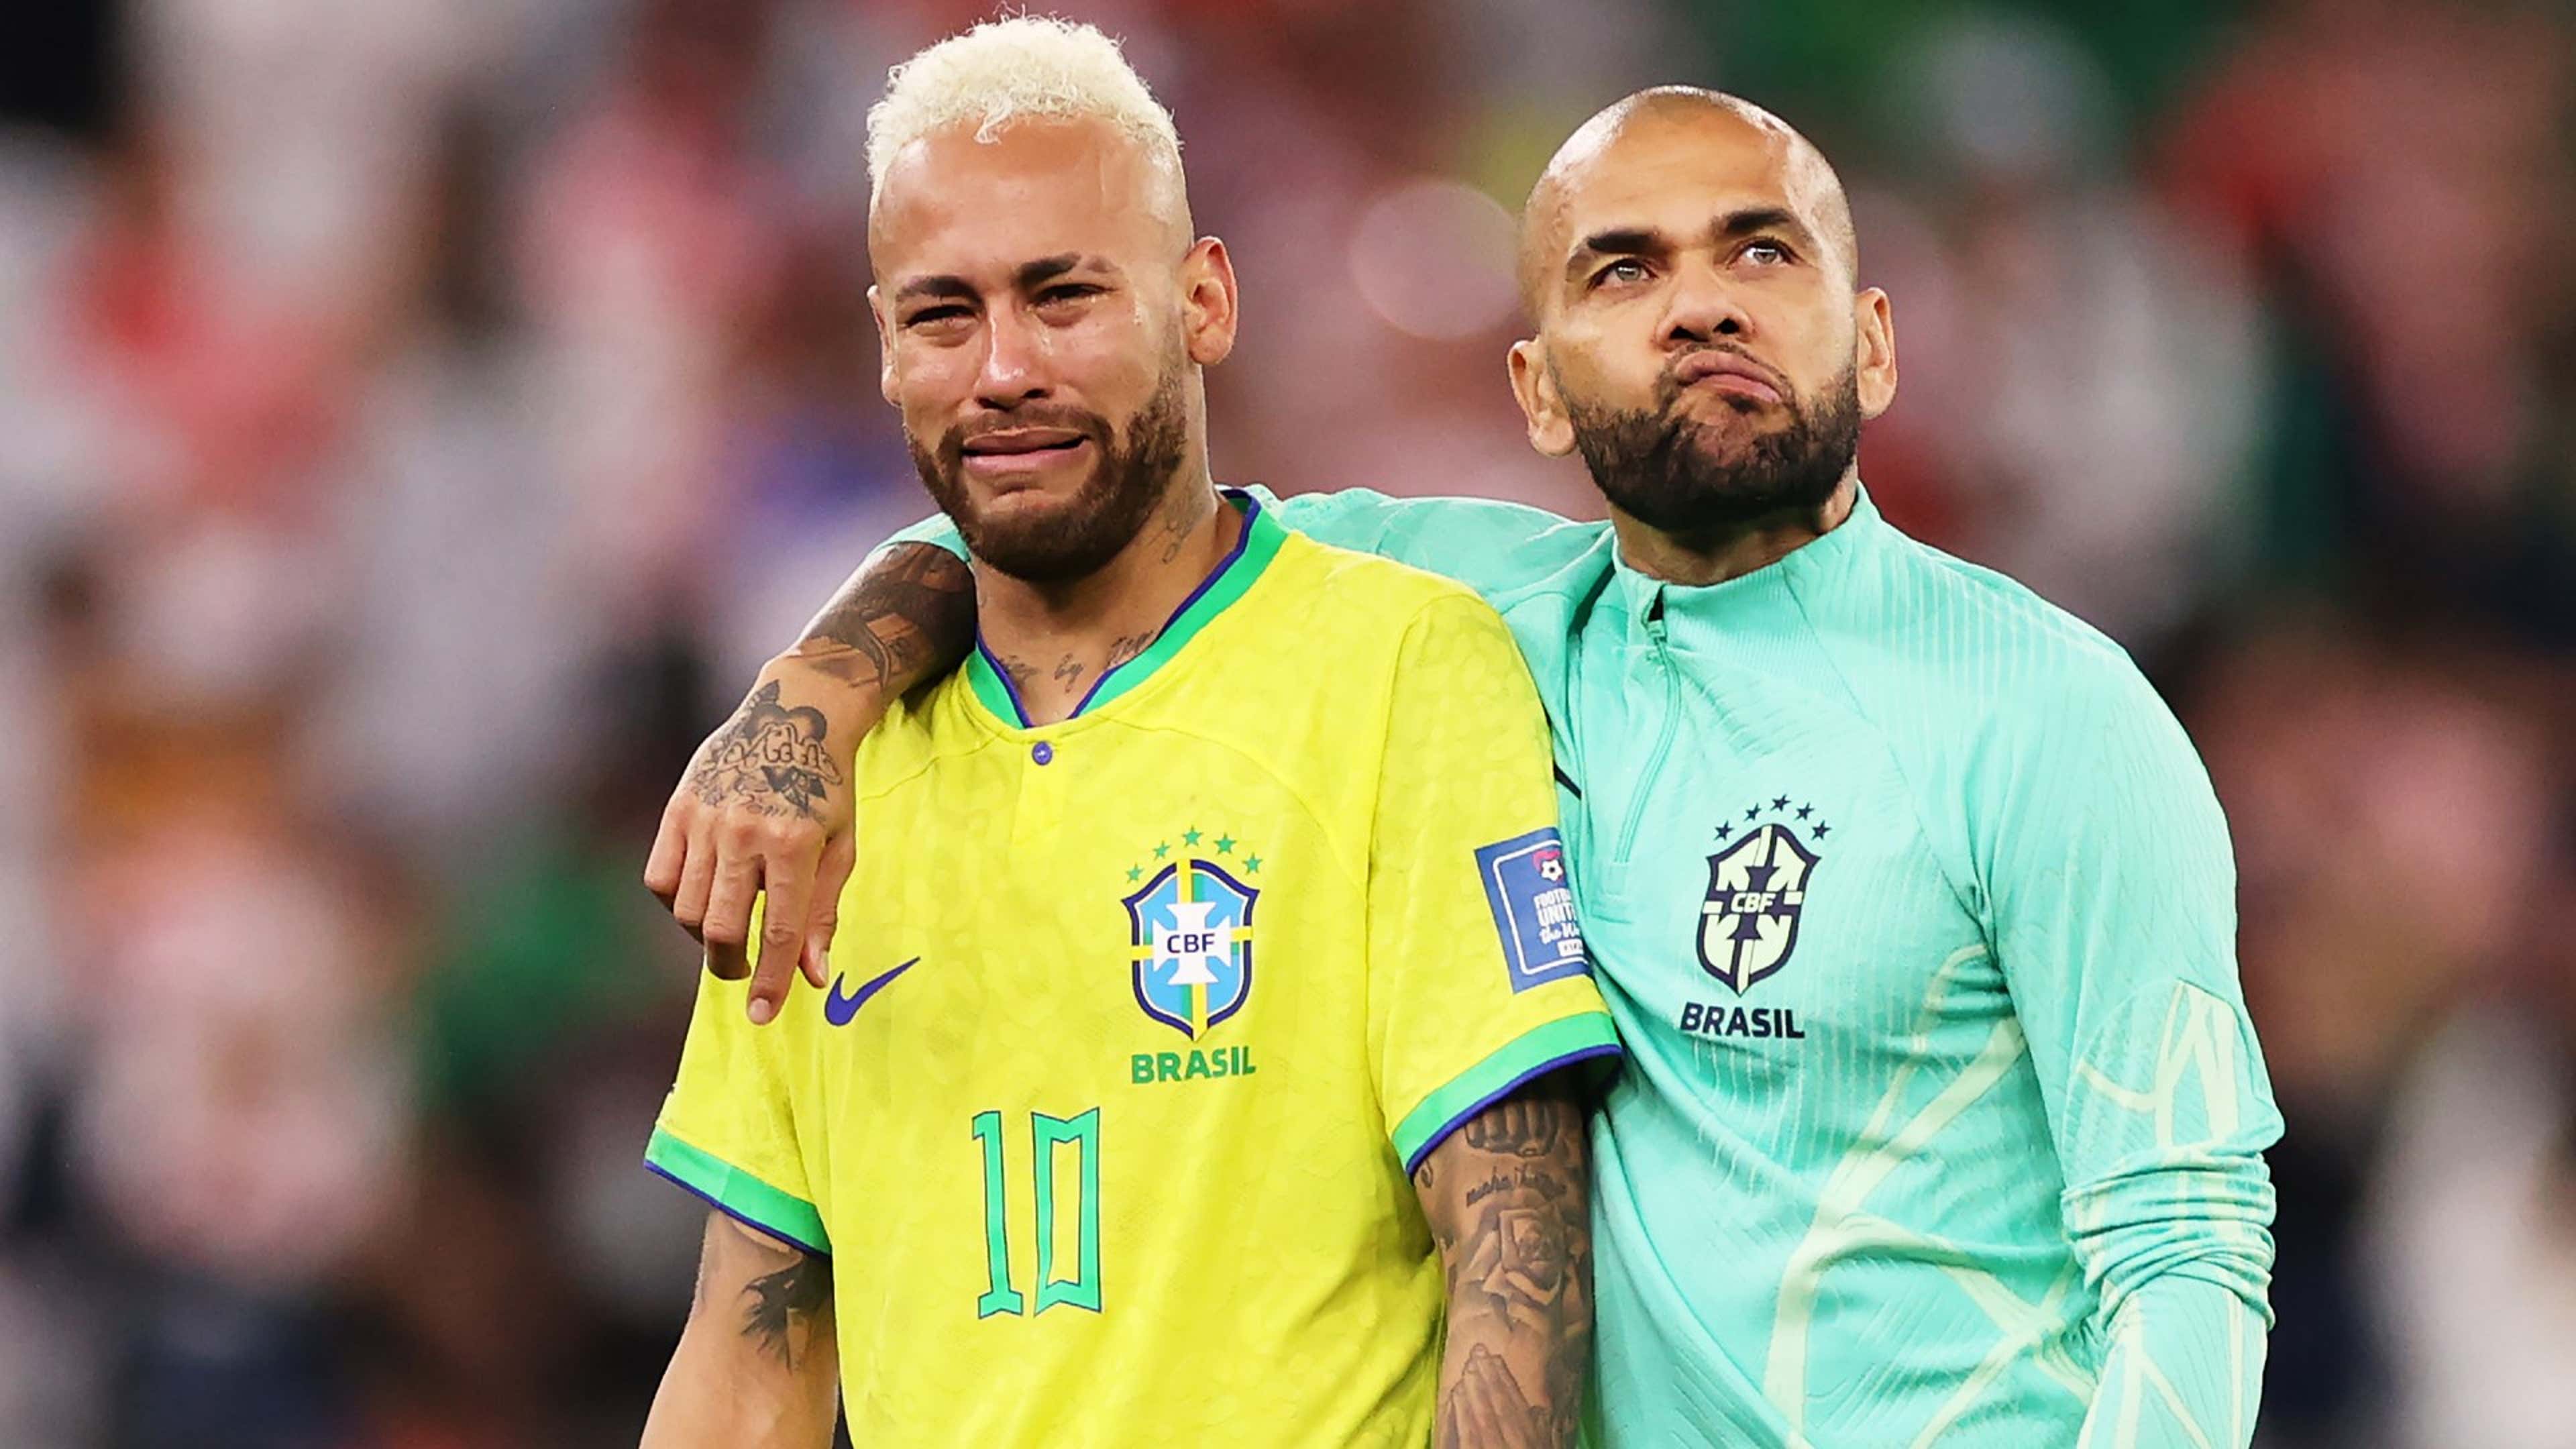 Neymar's father issues strong statement amid reports he will pay disgraced  Barcelona star Dani Alves' €1 million bail